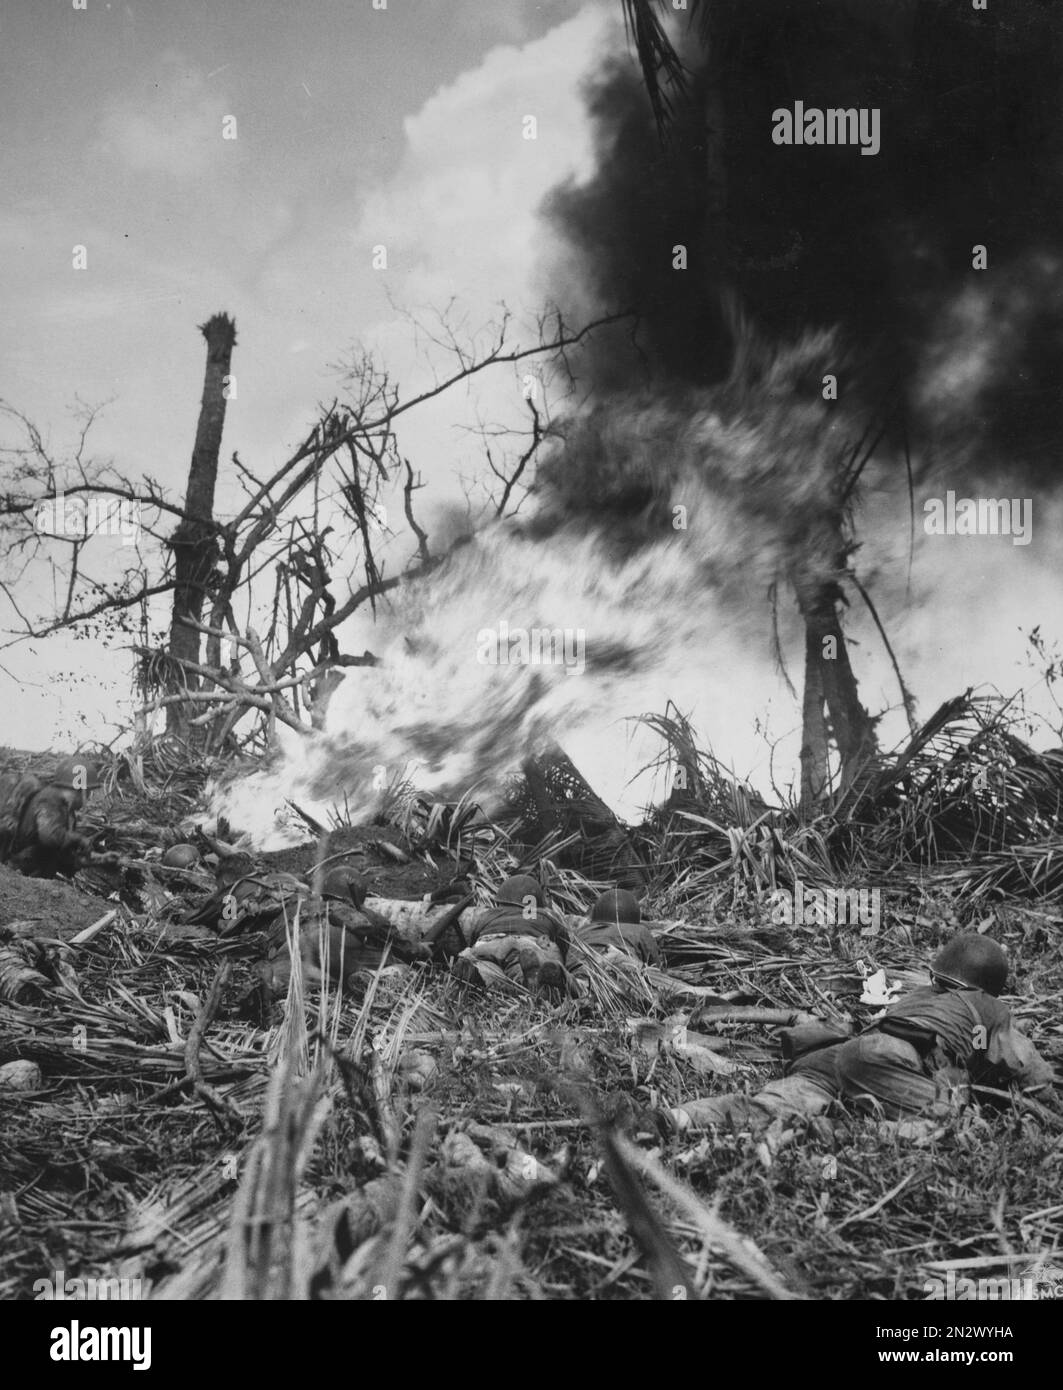 GUAM, MARIANA ISLANDS - August / September 1944 - US Marines use a flamethrower on a Japanese bunker during the Second Battle of Guam in the Mariana I Stock Photo